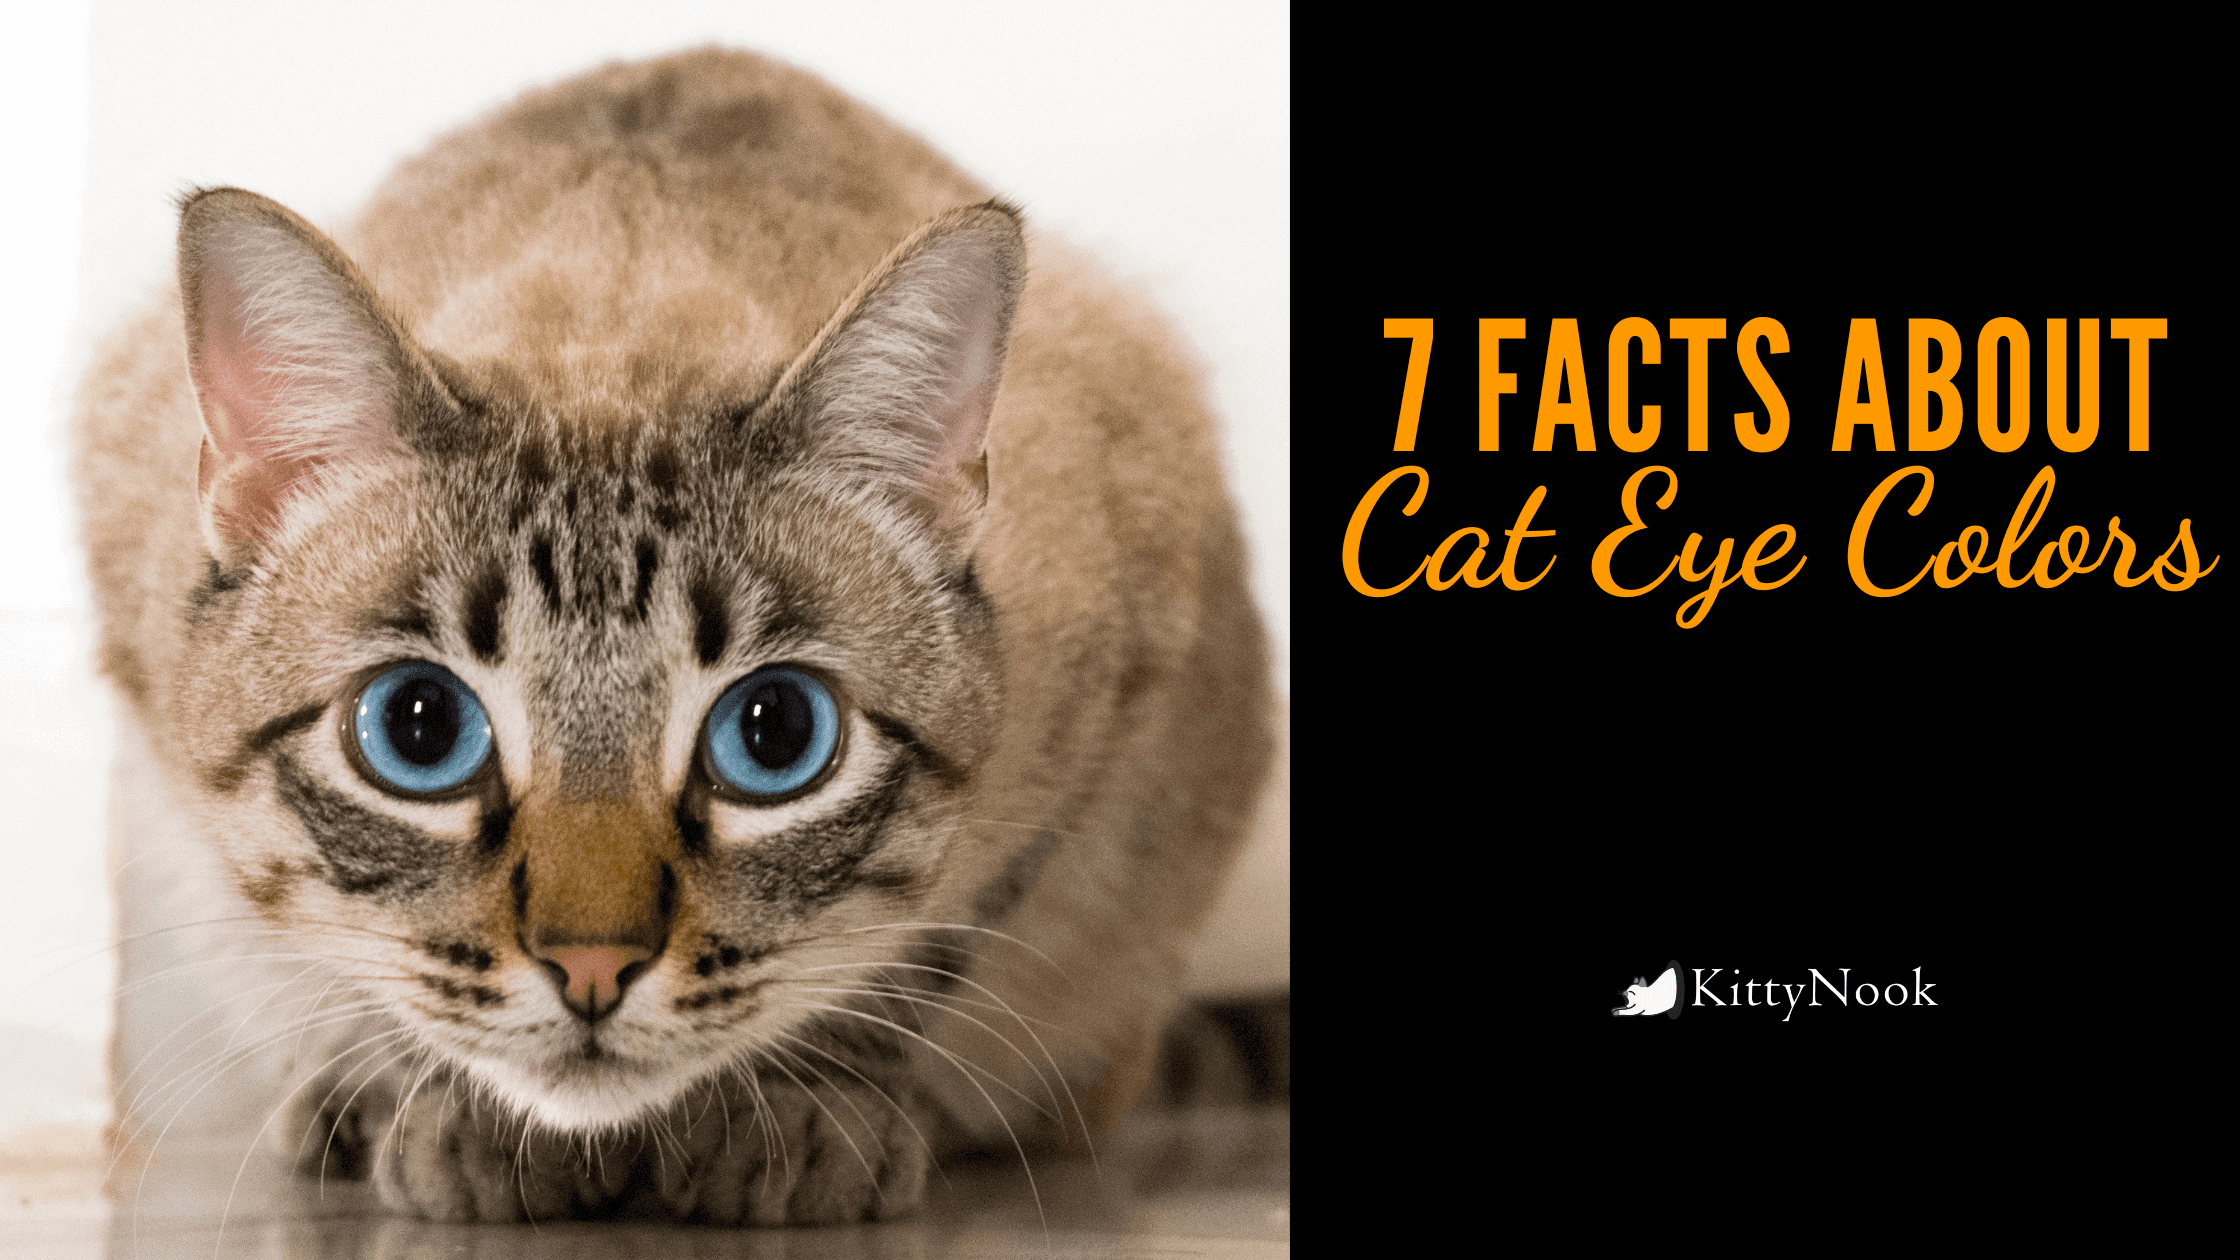 7 Amazing Facts About Cat Eye Colors - KittyNook